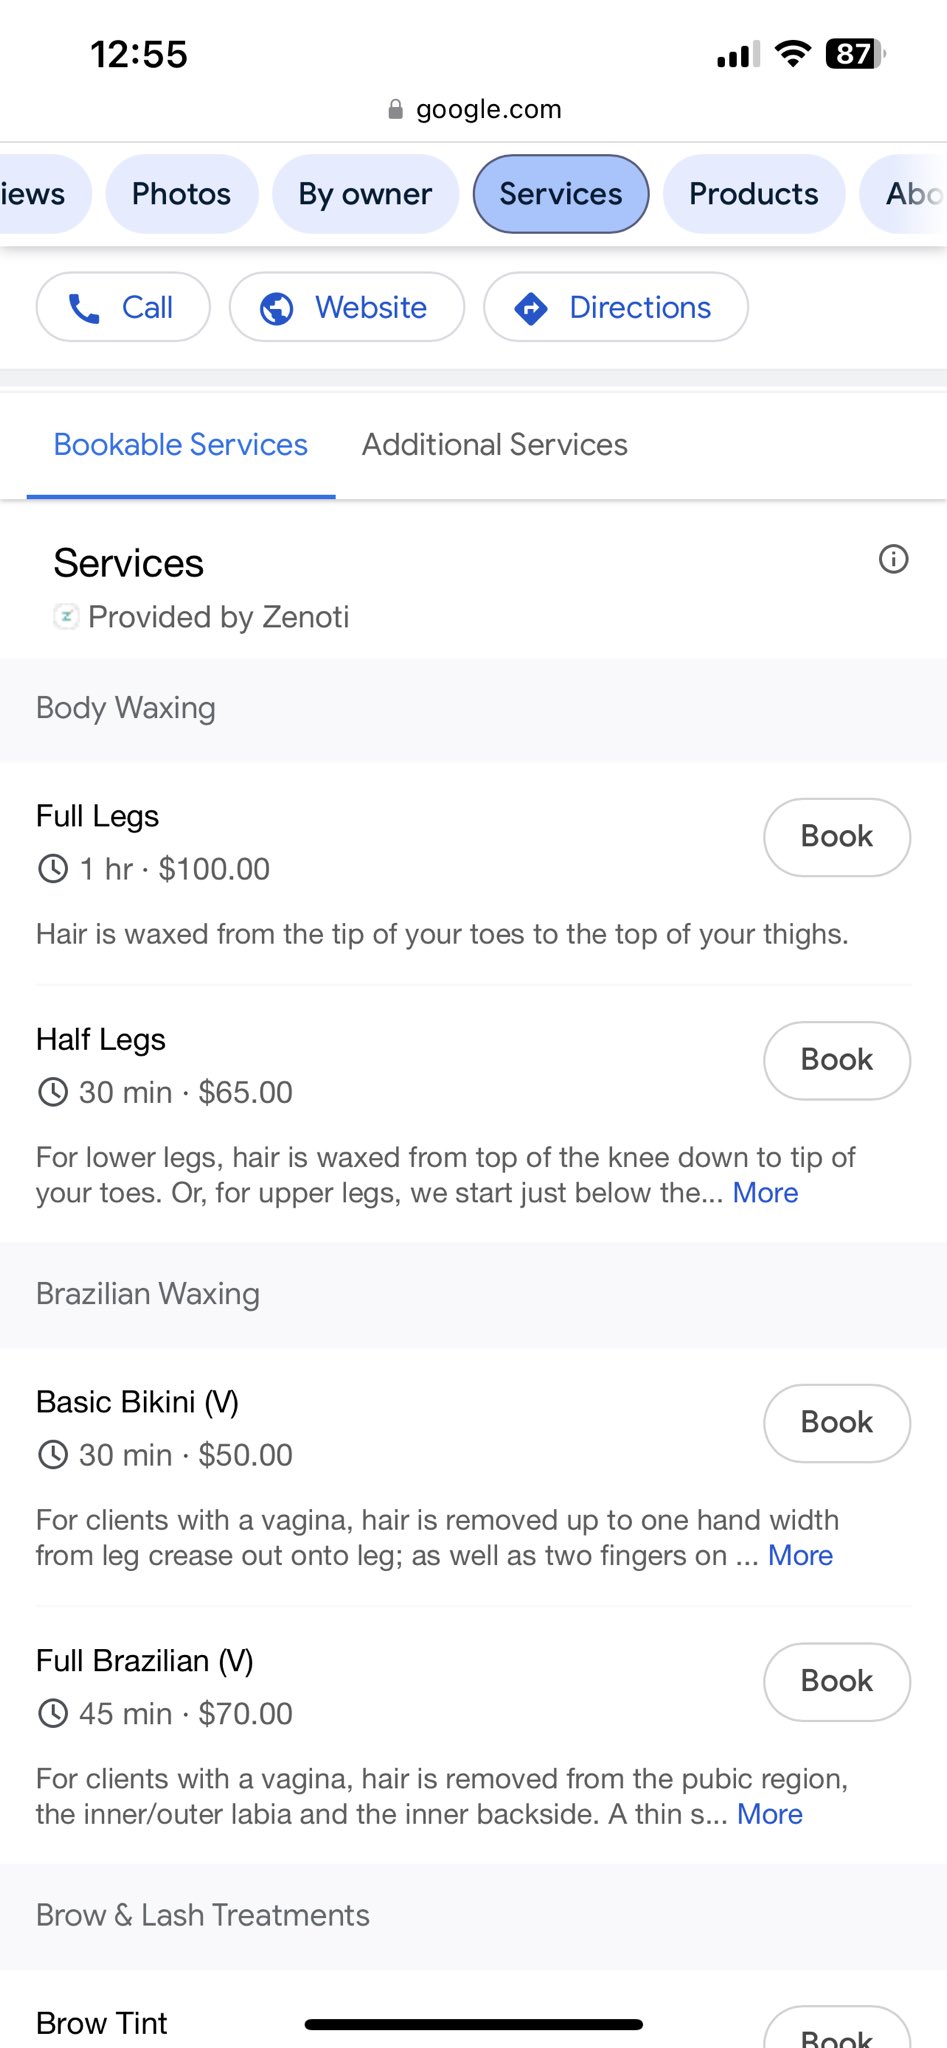 An example of the option to book services in a listing for a local wax studio